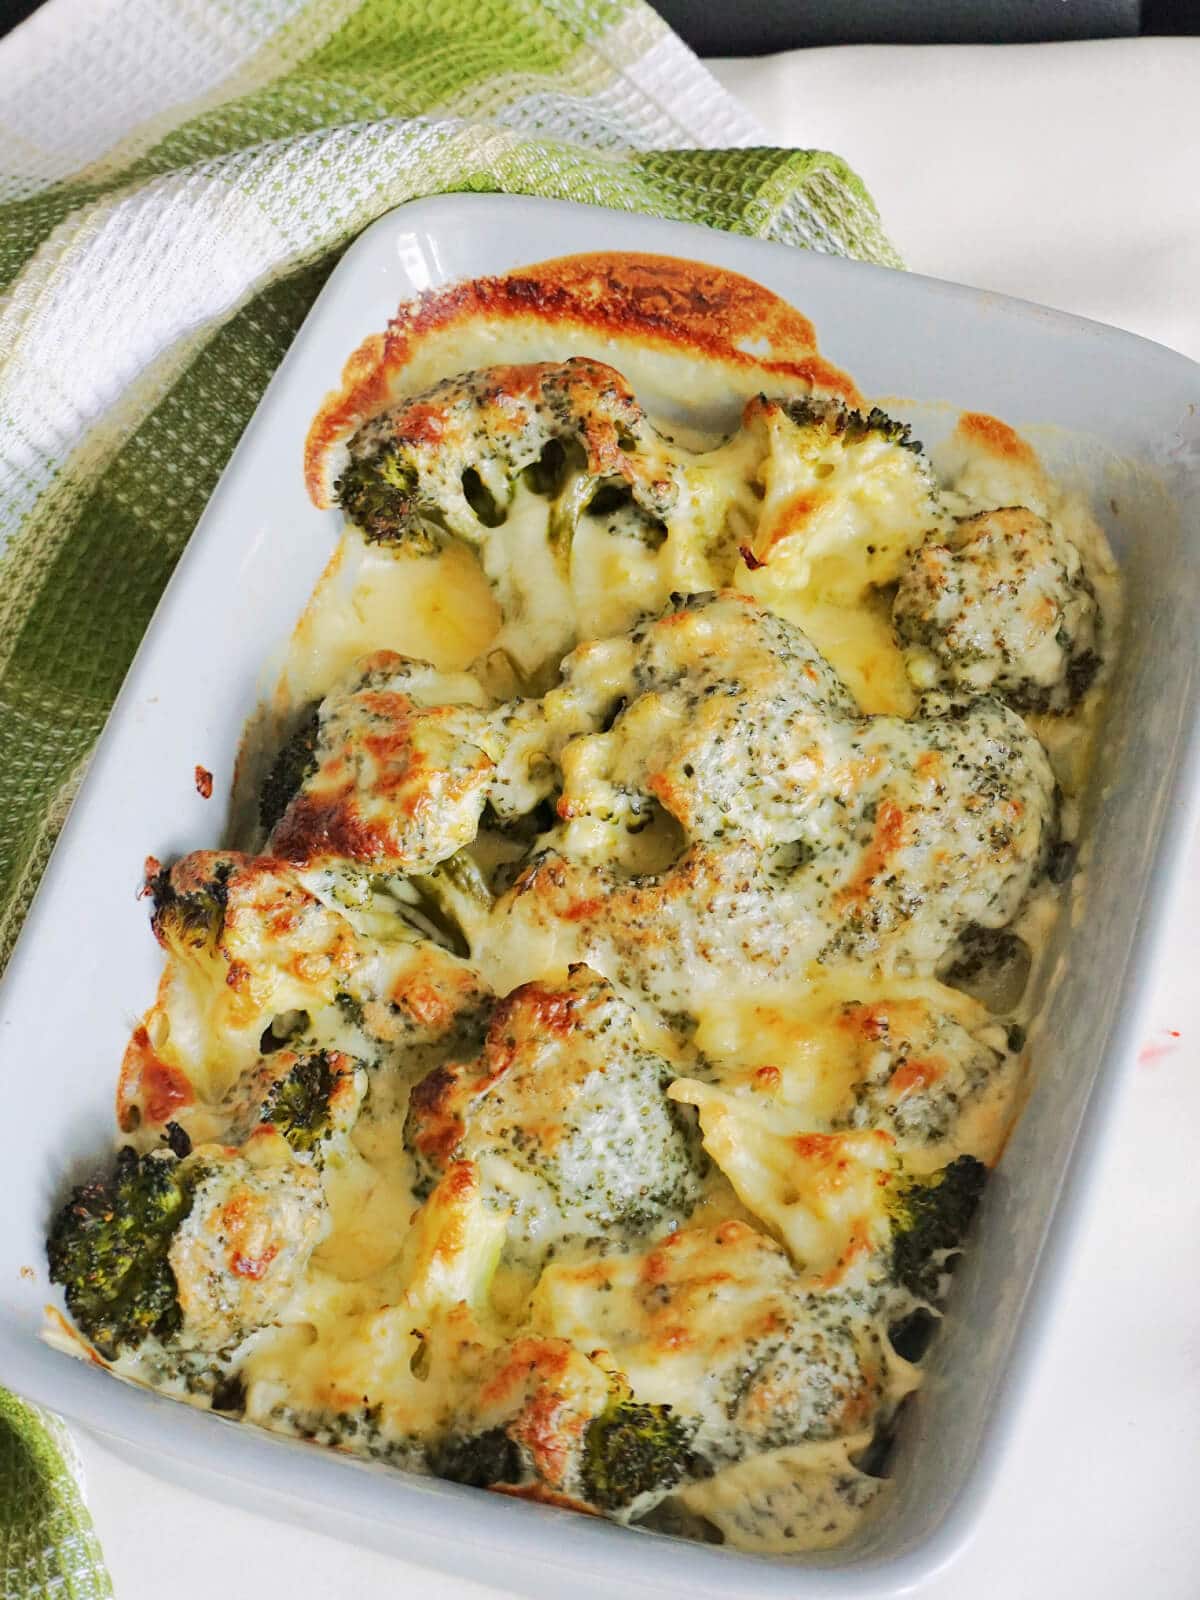 A dish with baked broccoli cheese.